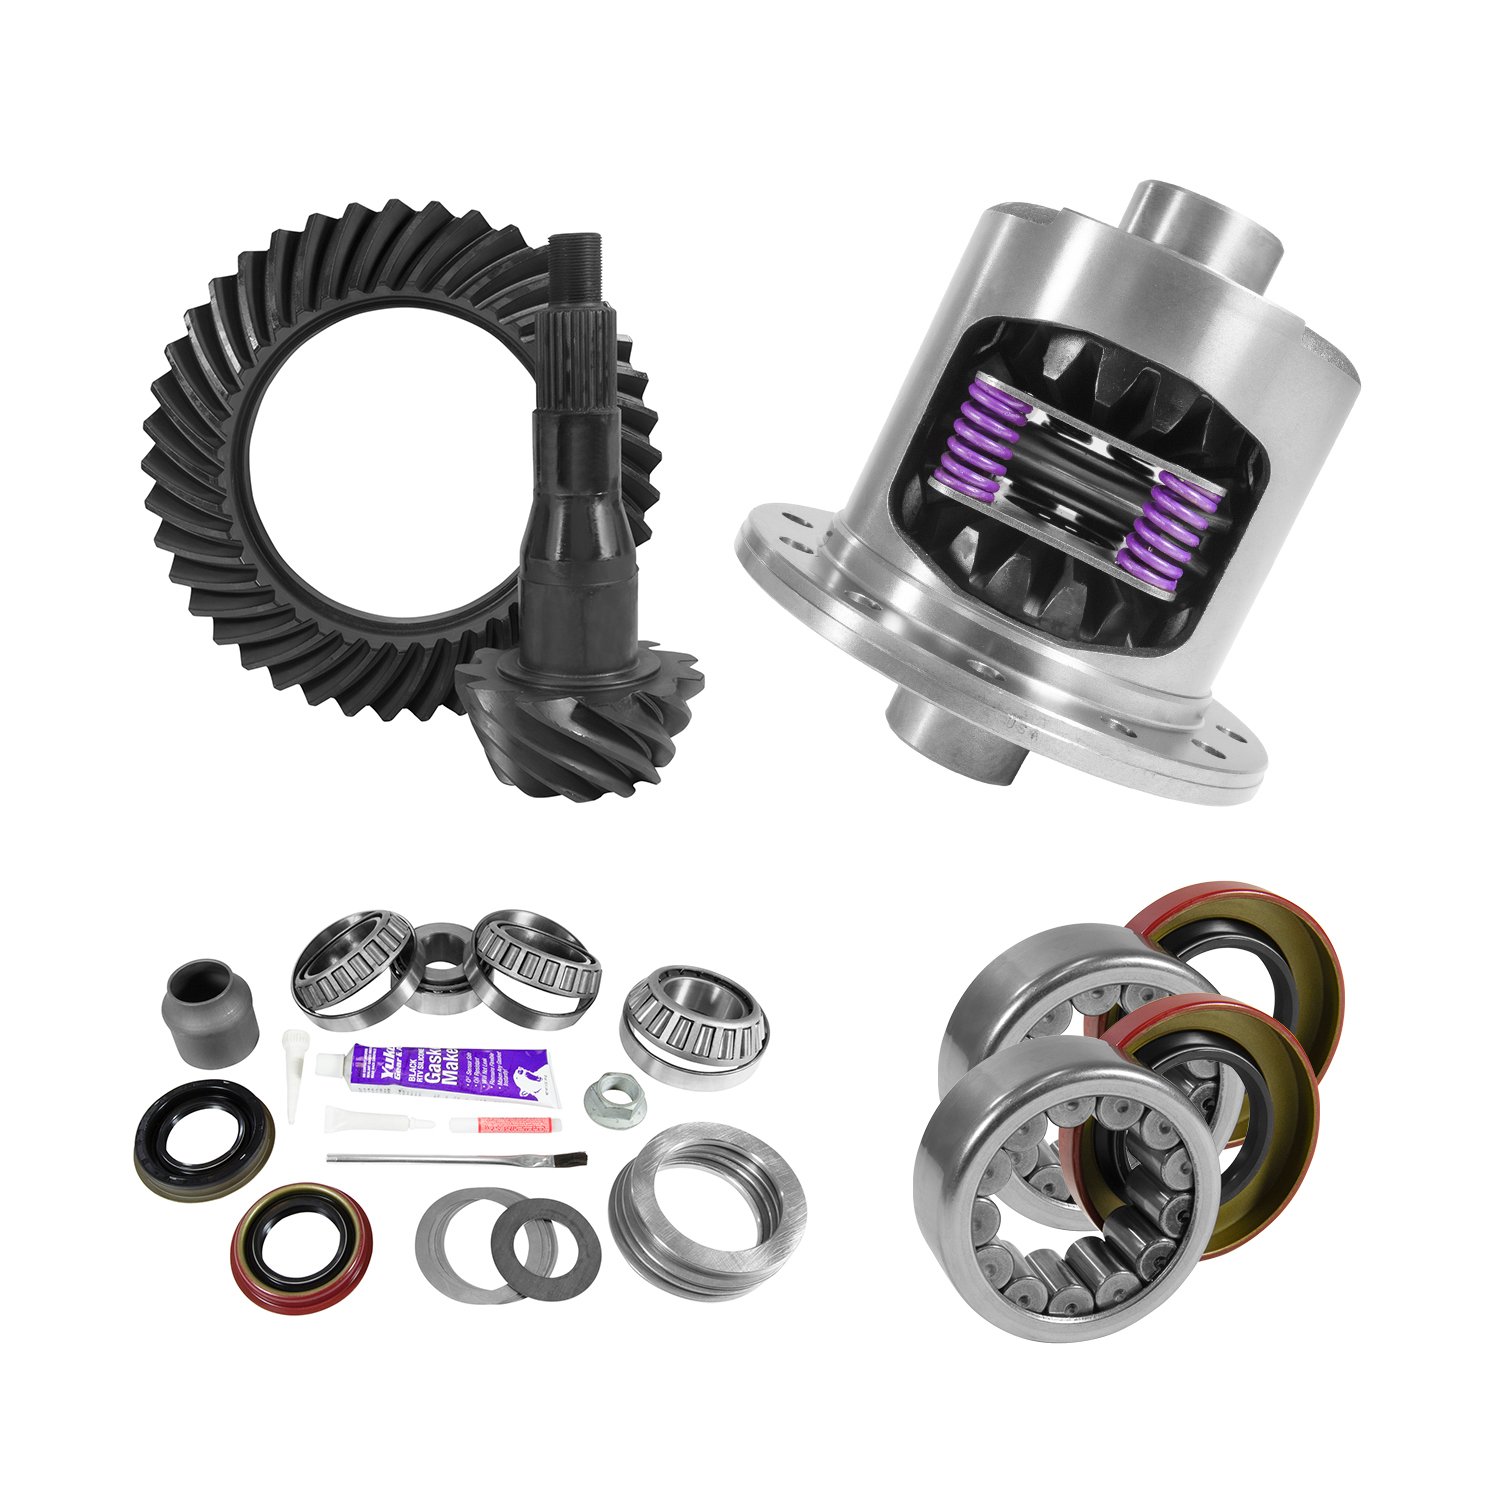 USA Standard 10808 9.75 in. Ford 3.55 Rear Ring & Pinion Install Kit, 34Spl Posi, 2.99 in. Axle Bearing